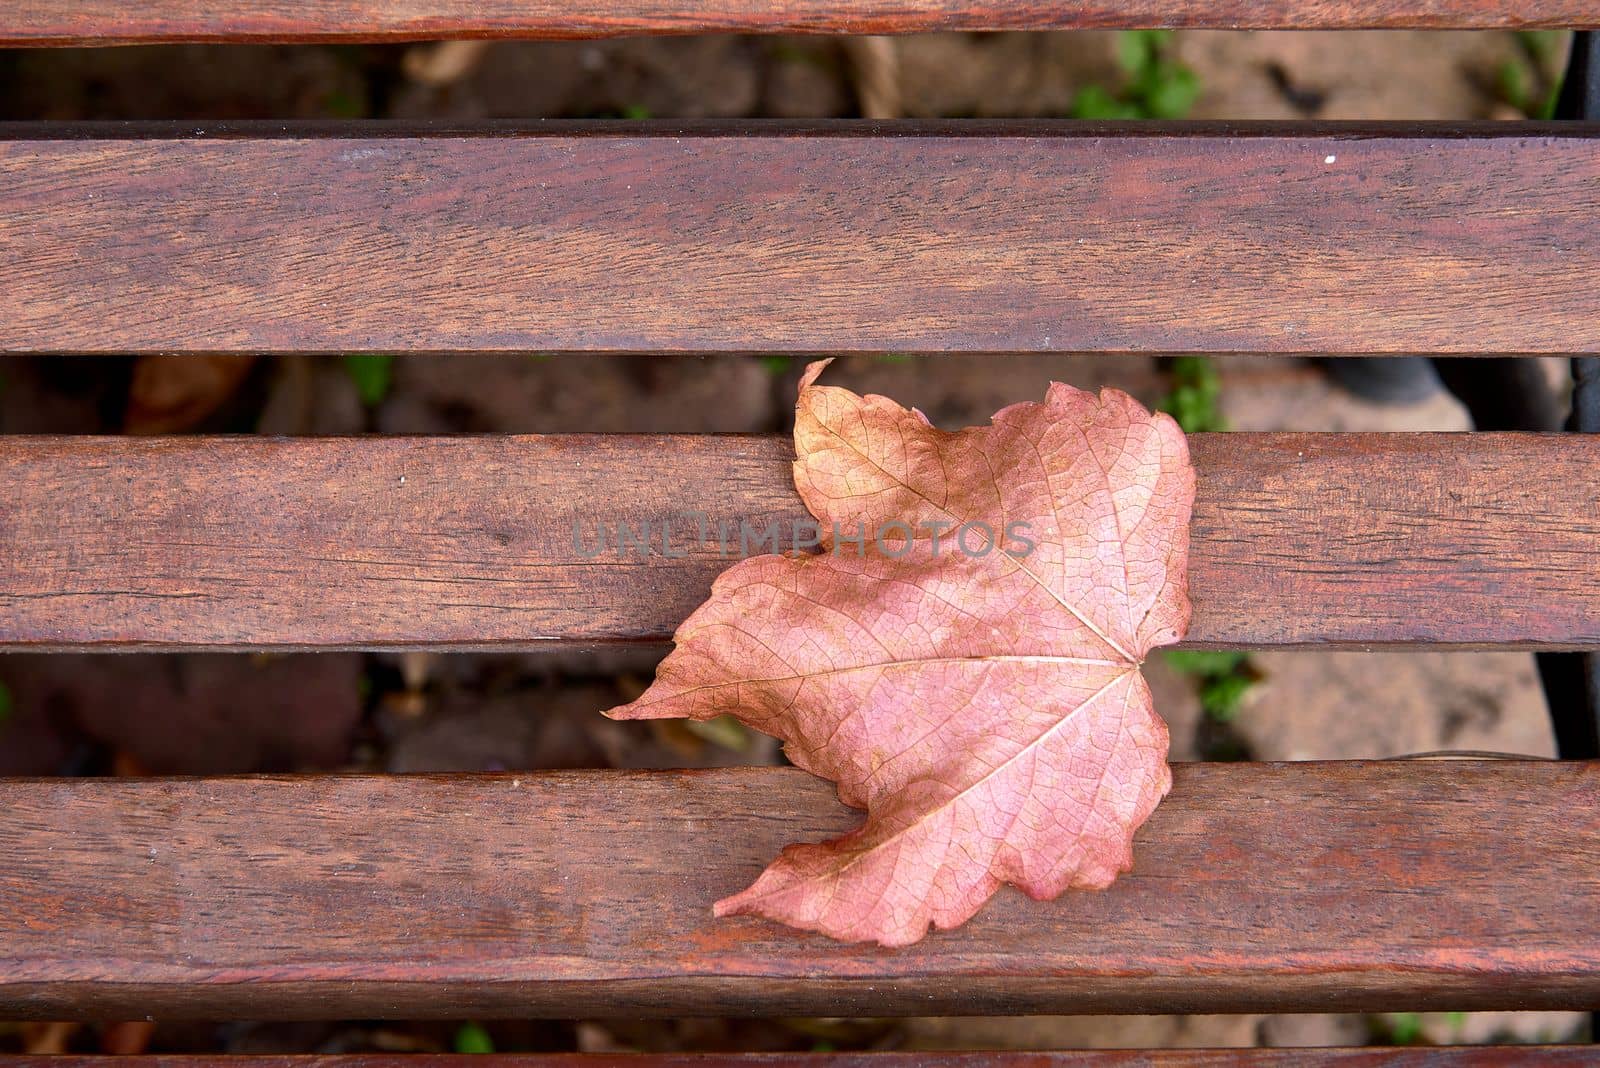 Autumn leaf on wooden planks of a bench by raul_ruiz